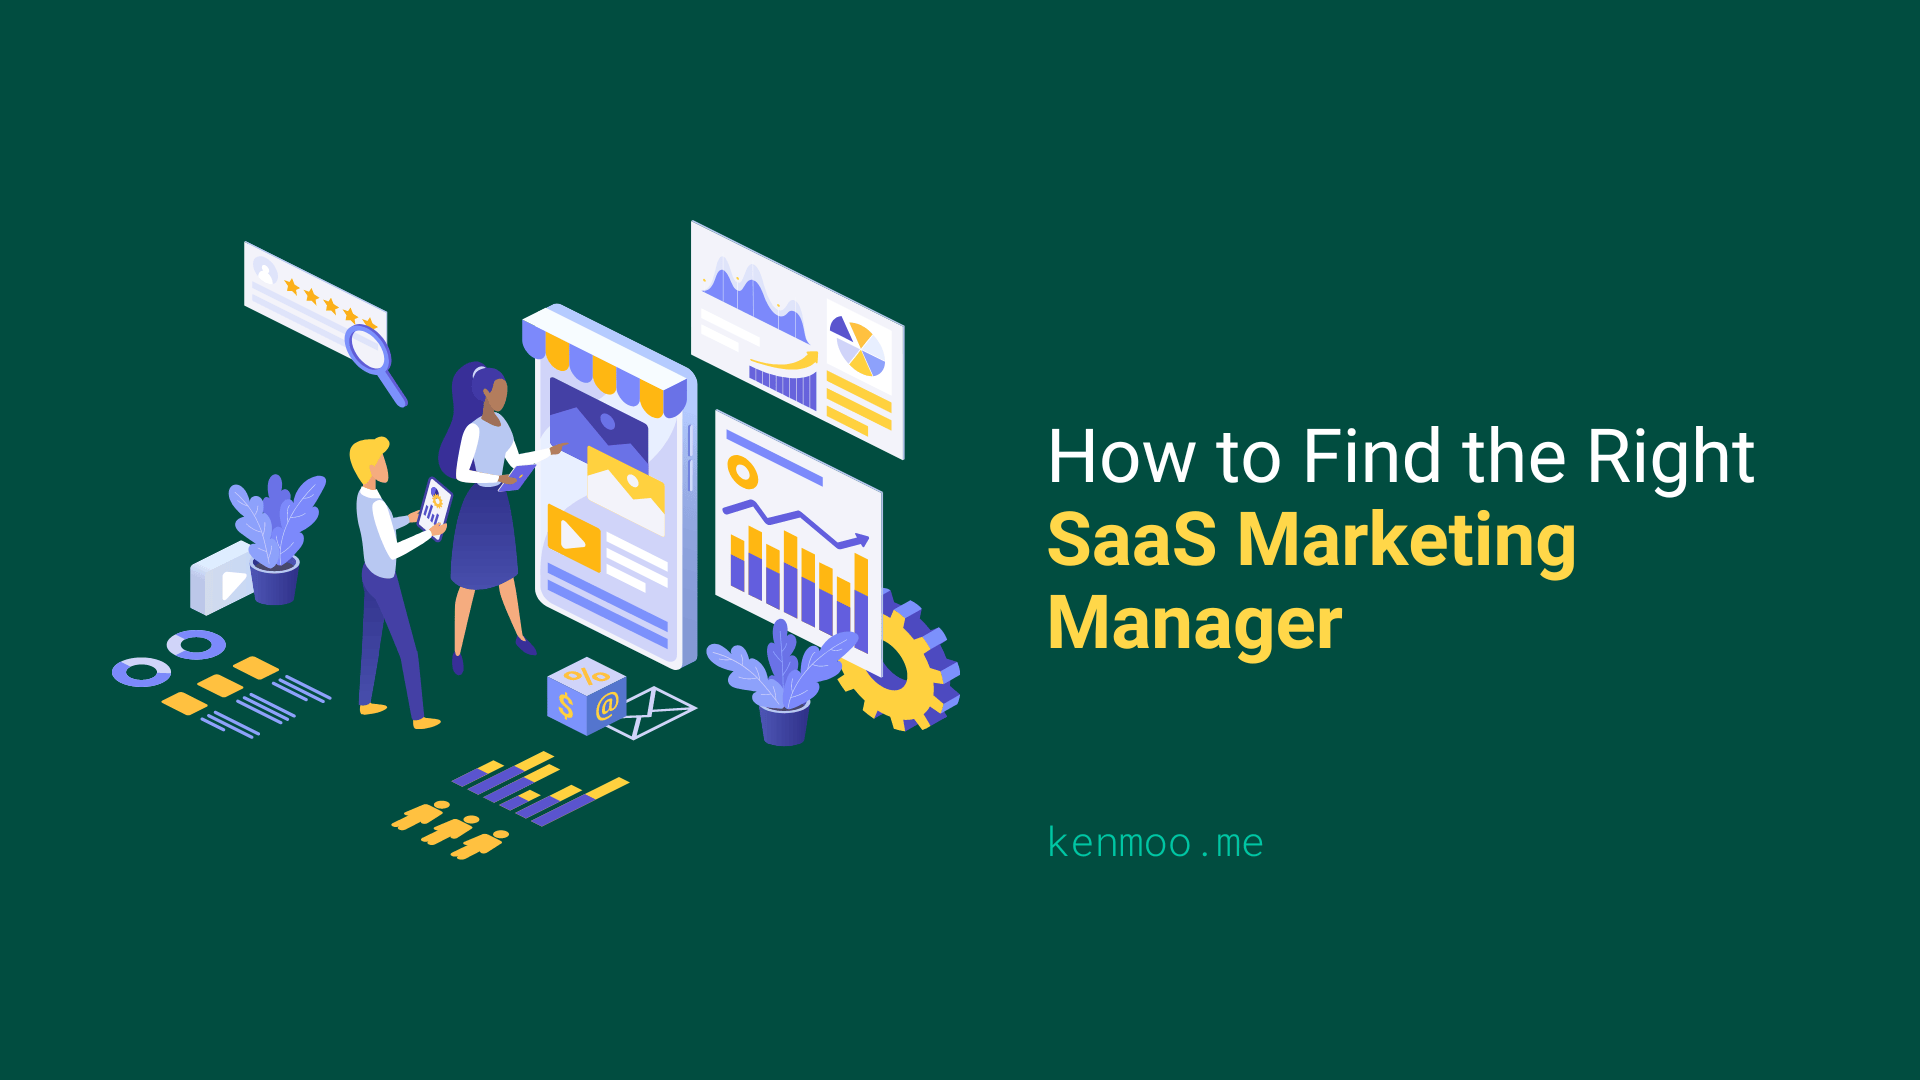 SaaS Marketing Manager